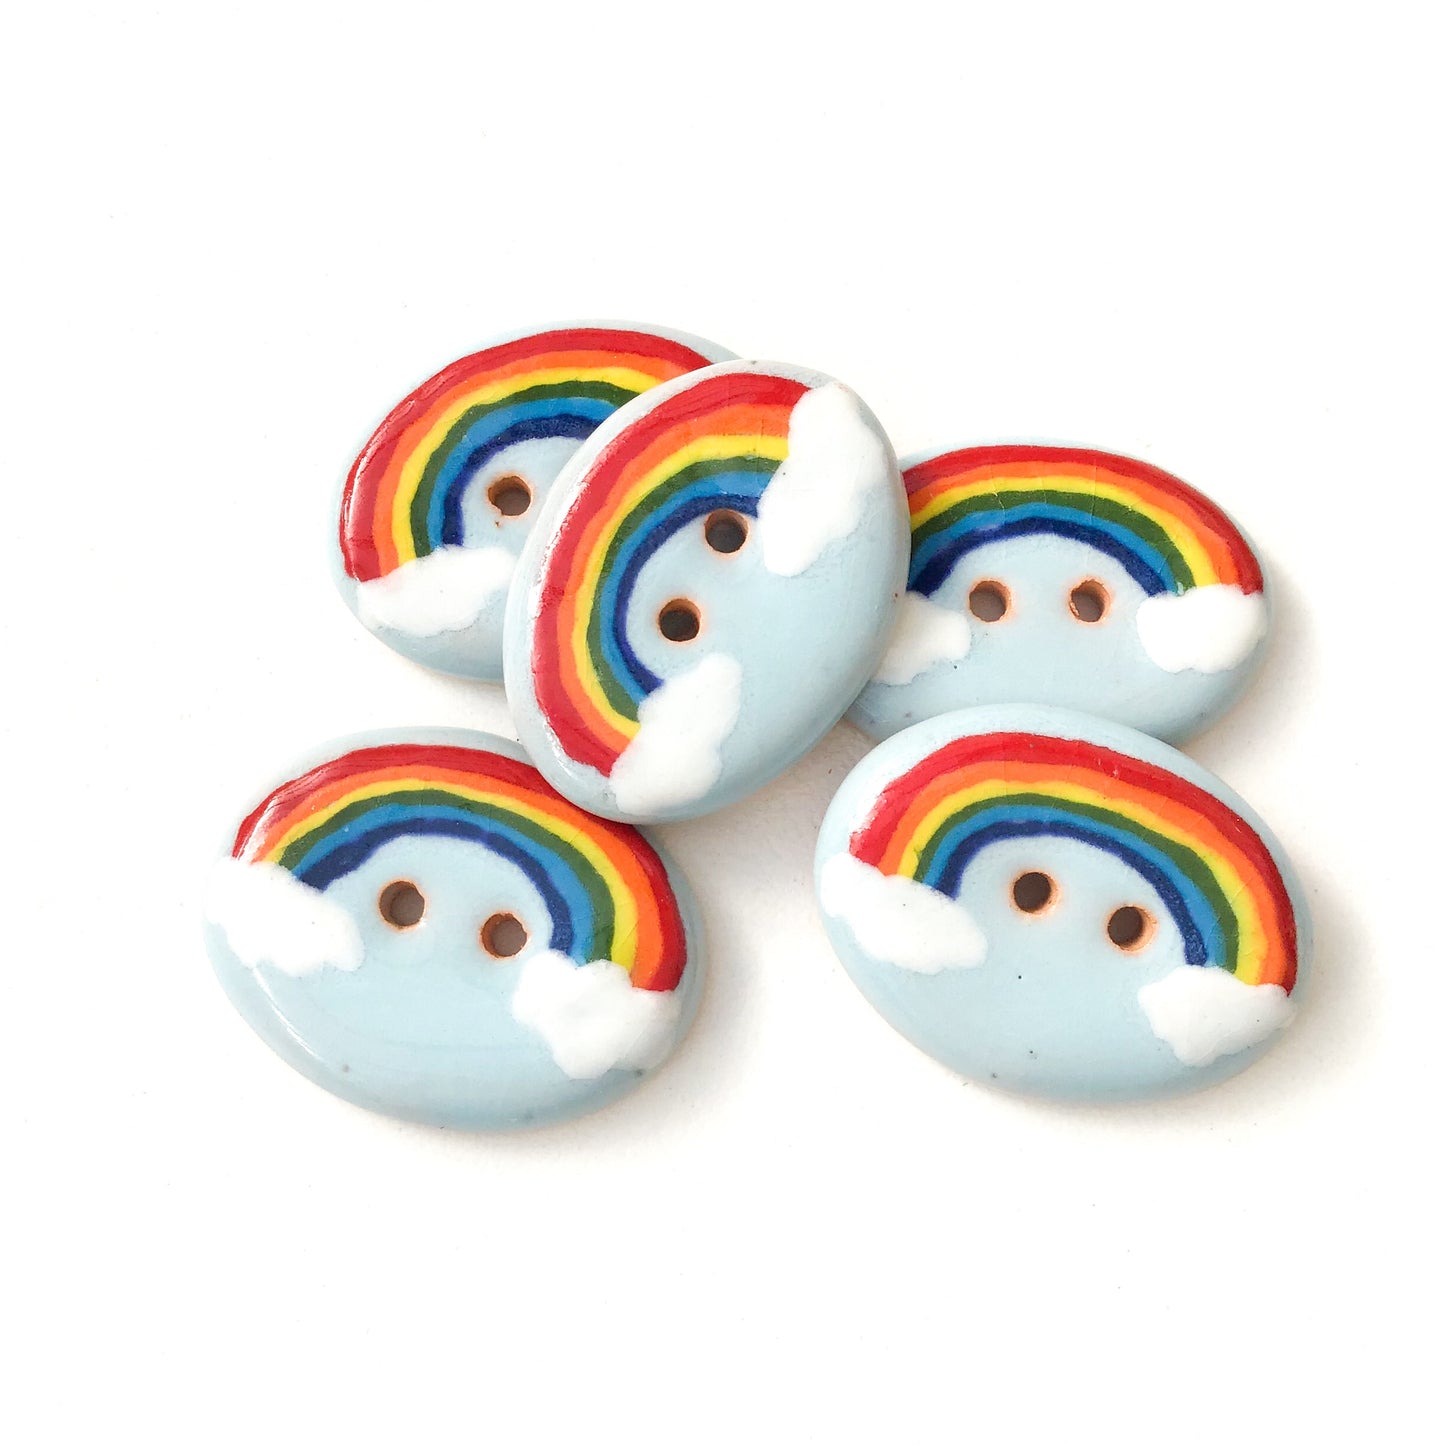 Over the Rainbow Buttons - Ceramic Rainbow Buttons - 3/4" x 1 1/8"